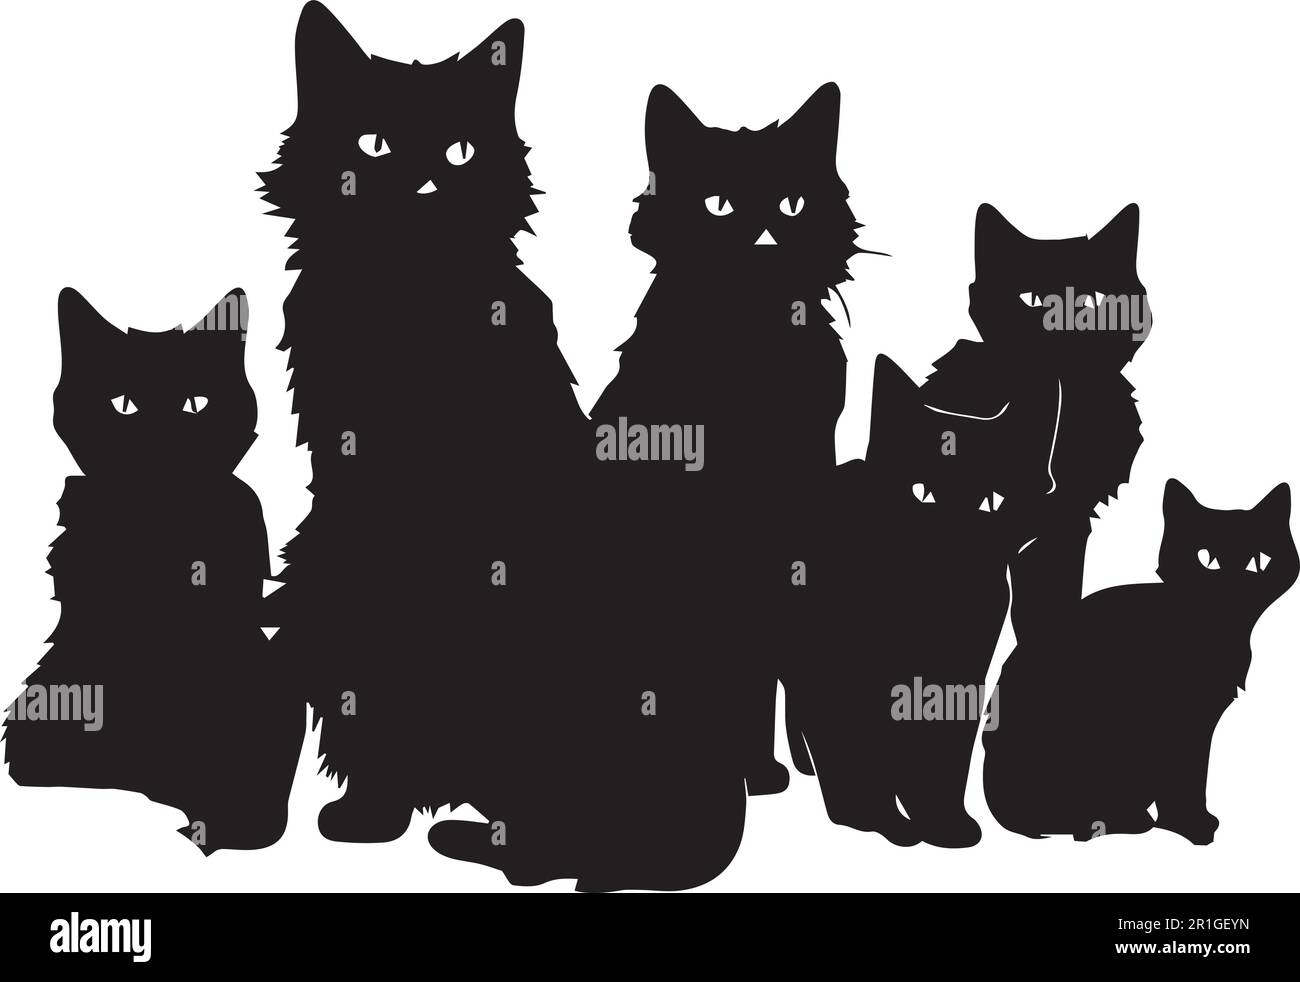 A black silhouette cat groups vector illustration. Stock Vector